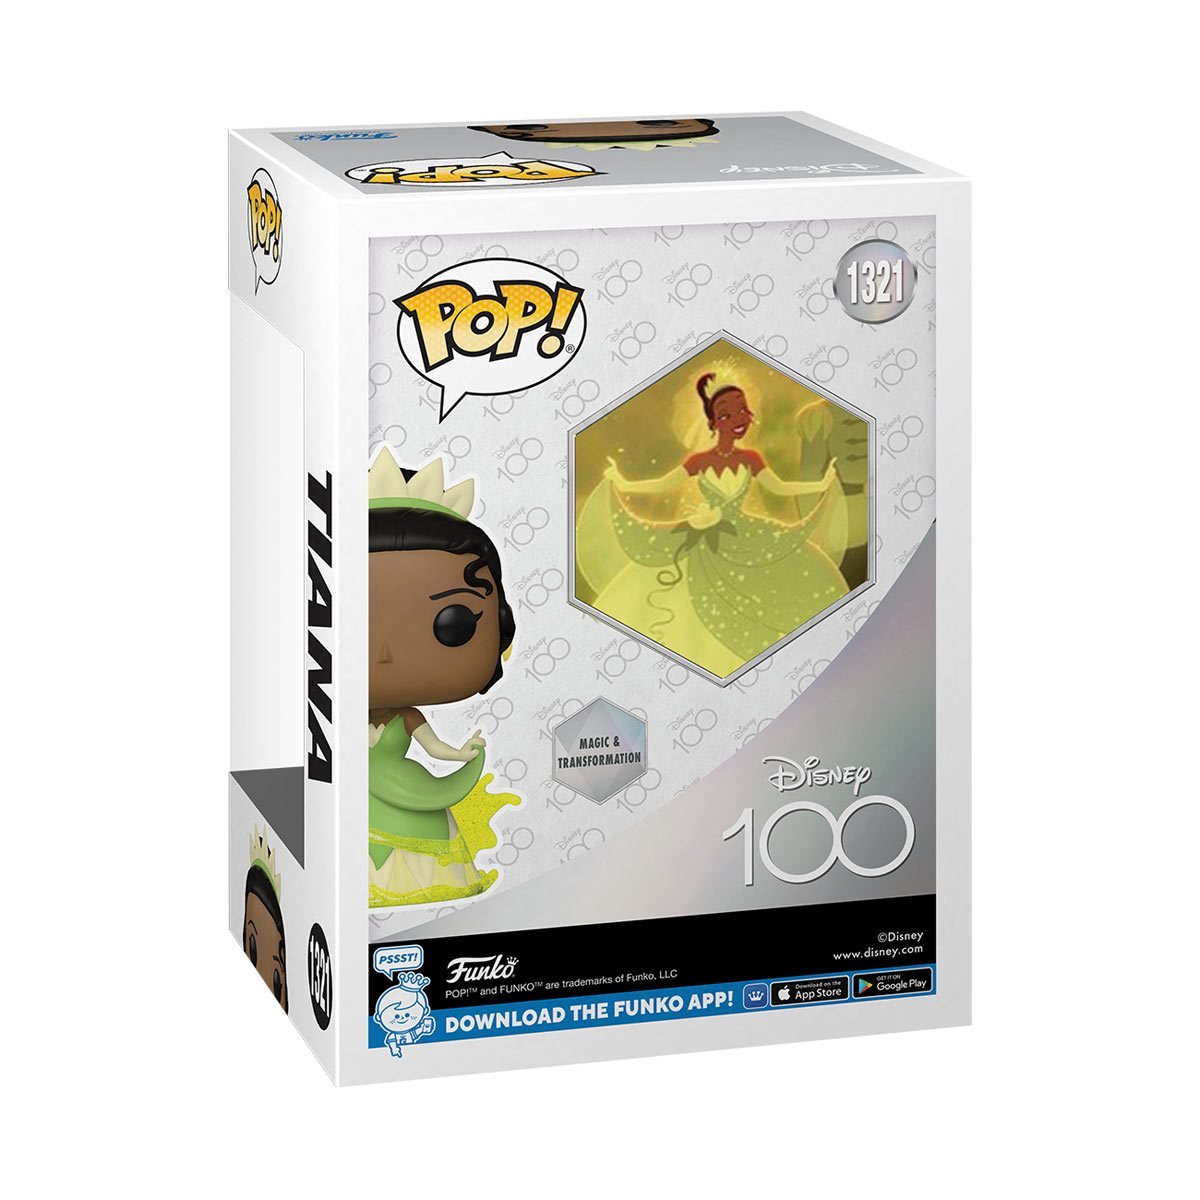 Funko on X: Great photo of our Funko exclusive Tiana (Gold